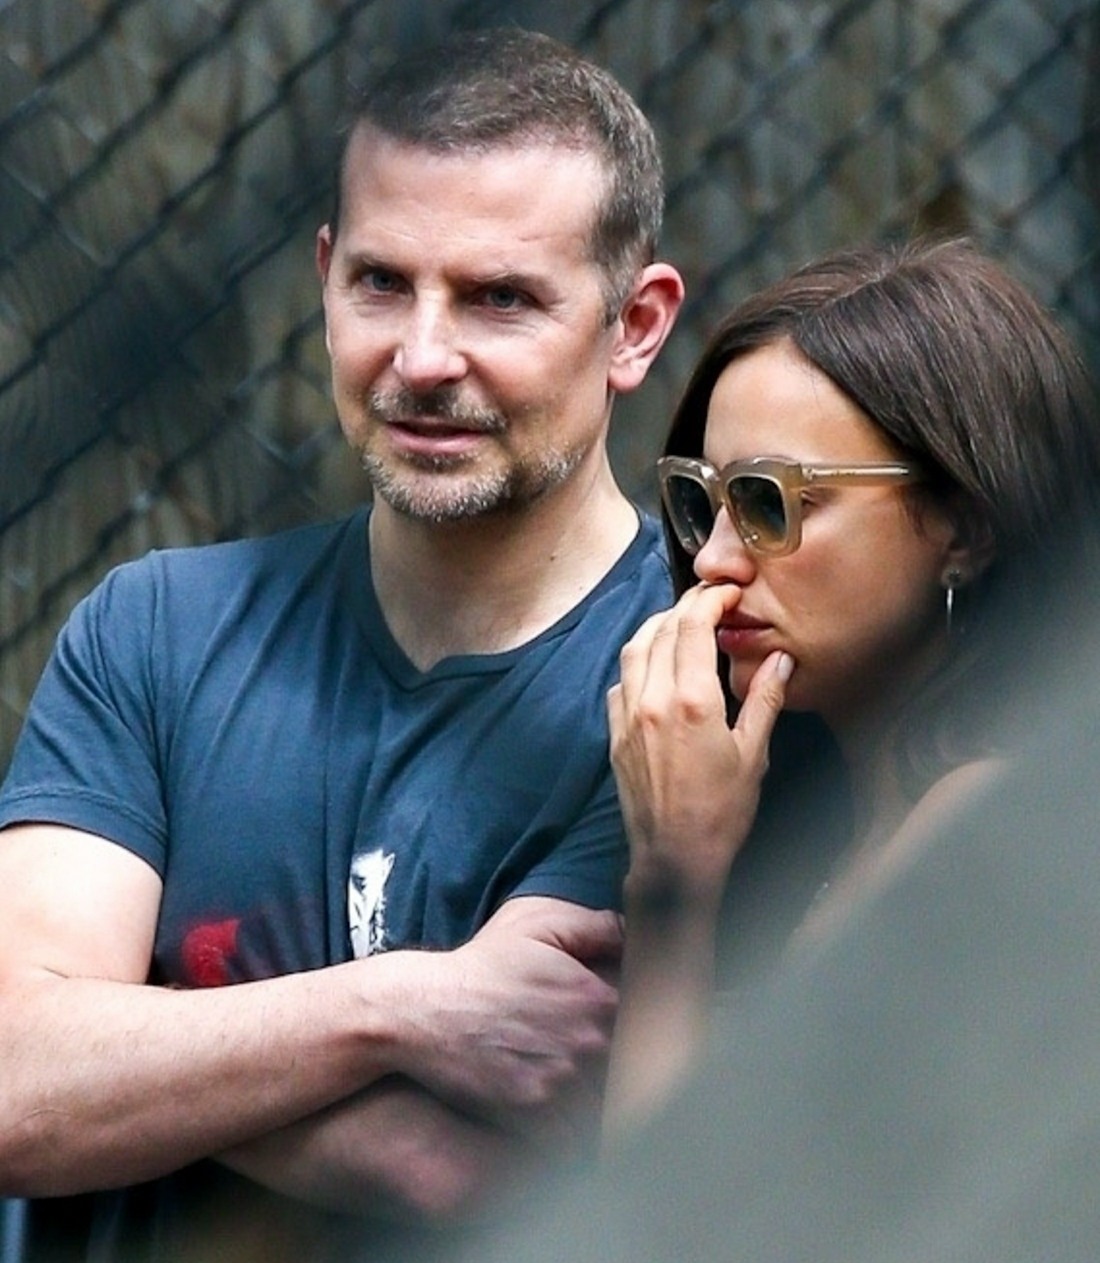 Friendly exes Irina Shayk and Bradley Cooper pictured chatting at a local park in NYC!